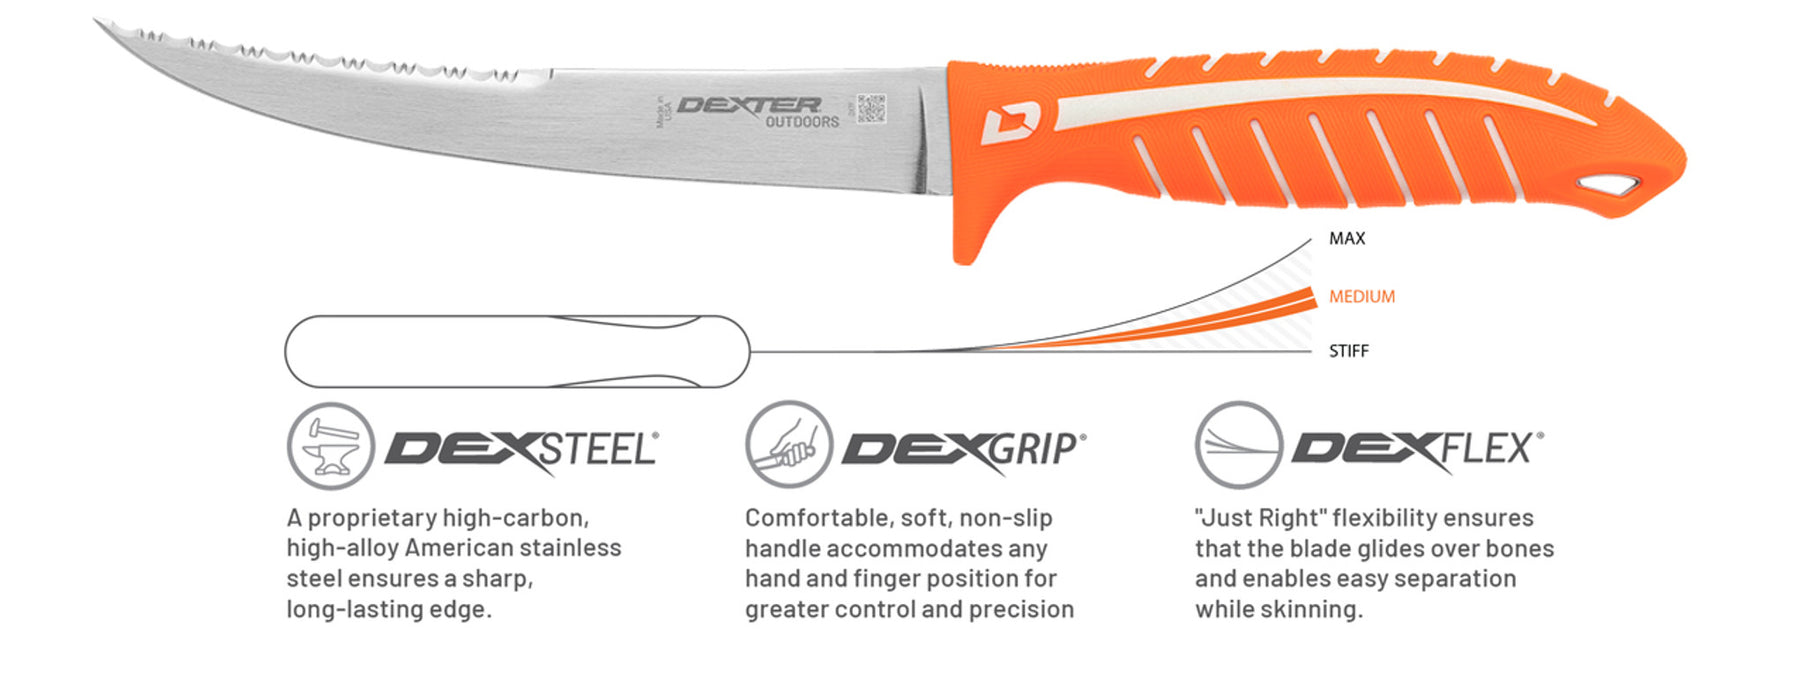 Dexter Outdoors DEXTREME Dual Edge 7" Flexible Fillet Knife with Sheath